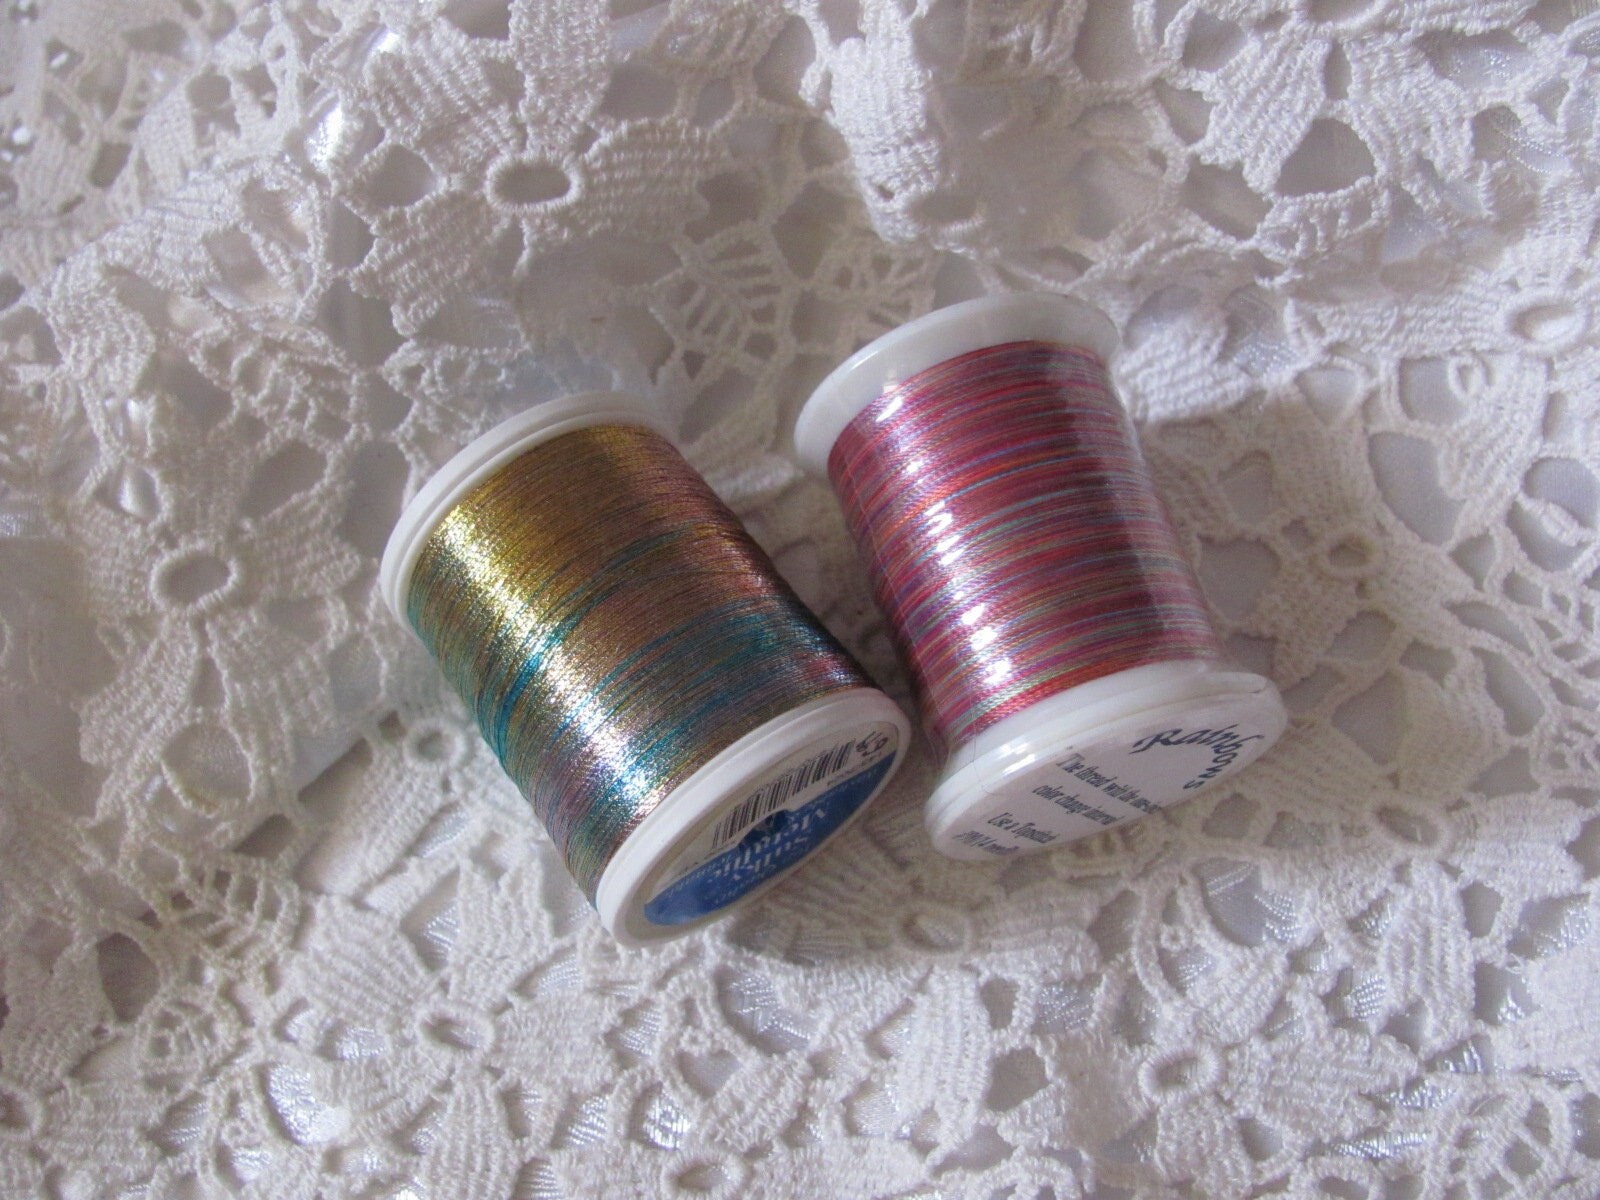 High-quality Superior Metallic embroidery and quilting thread